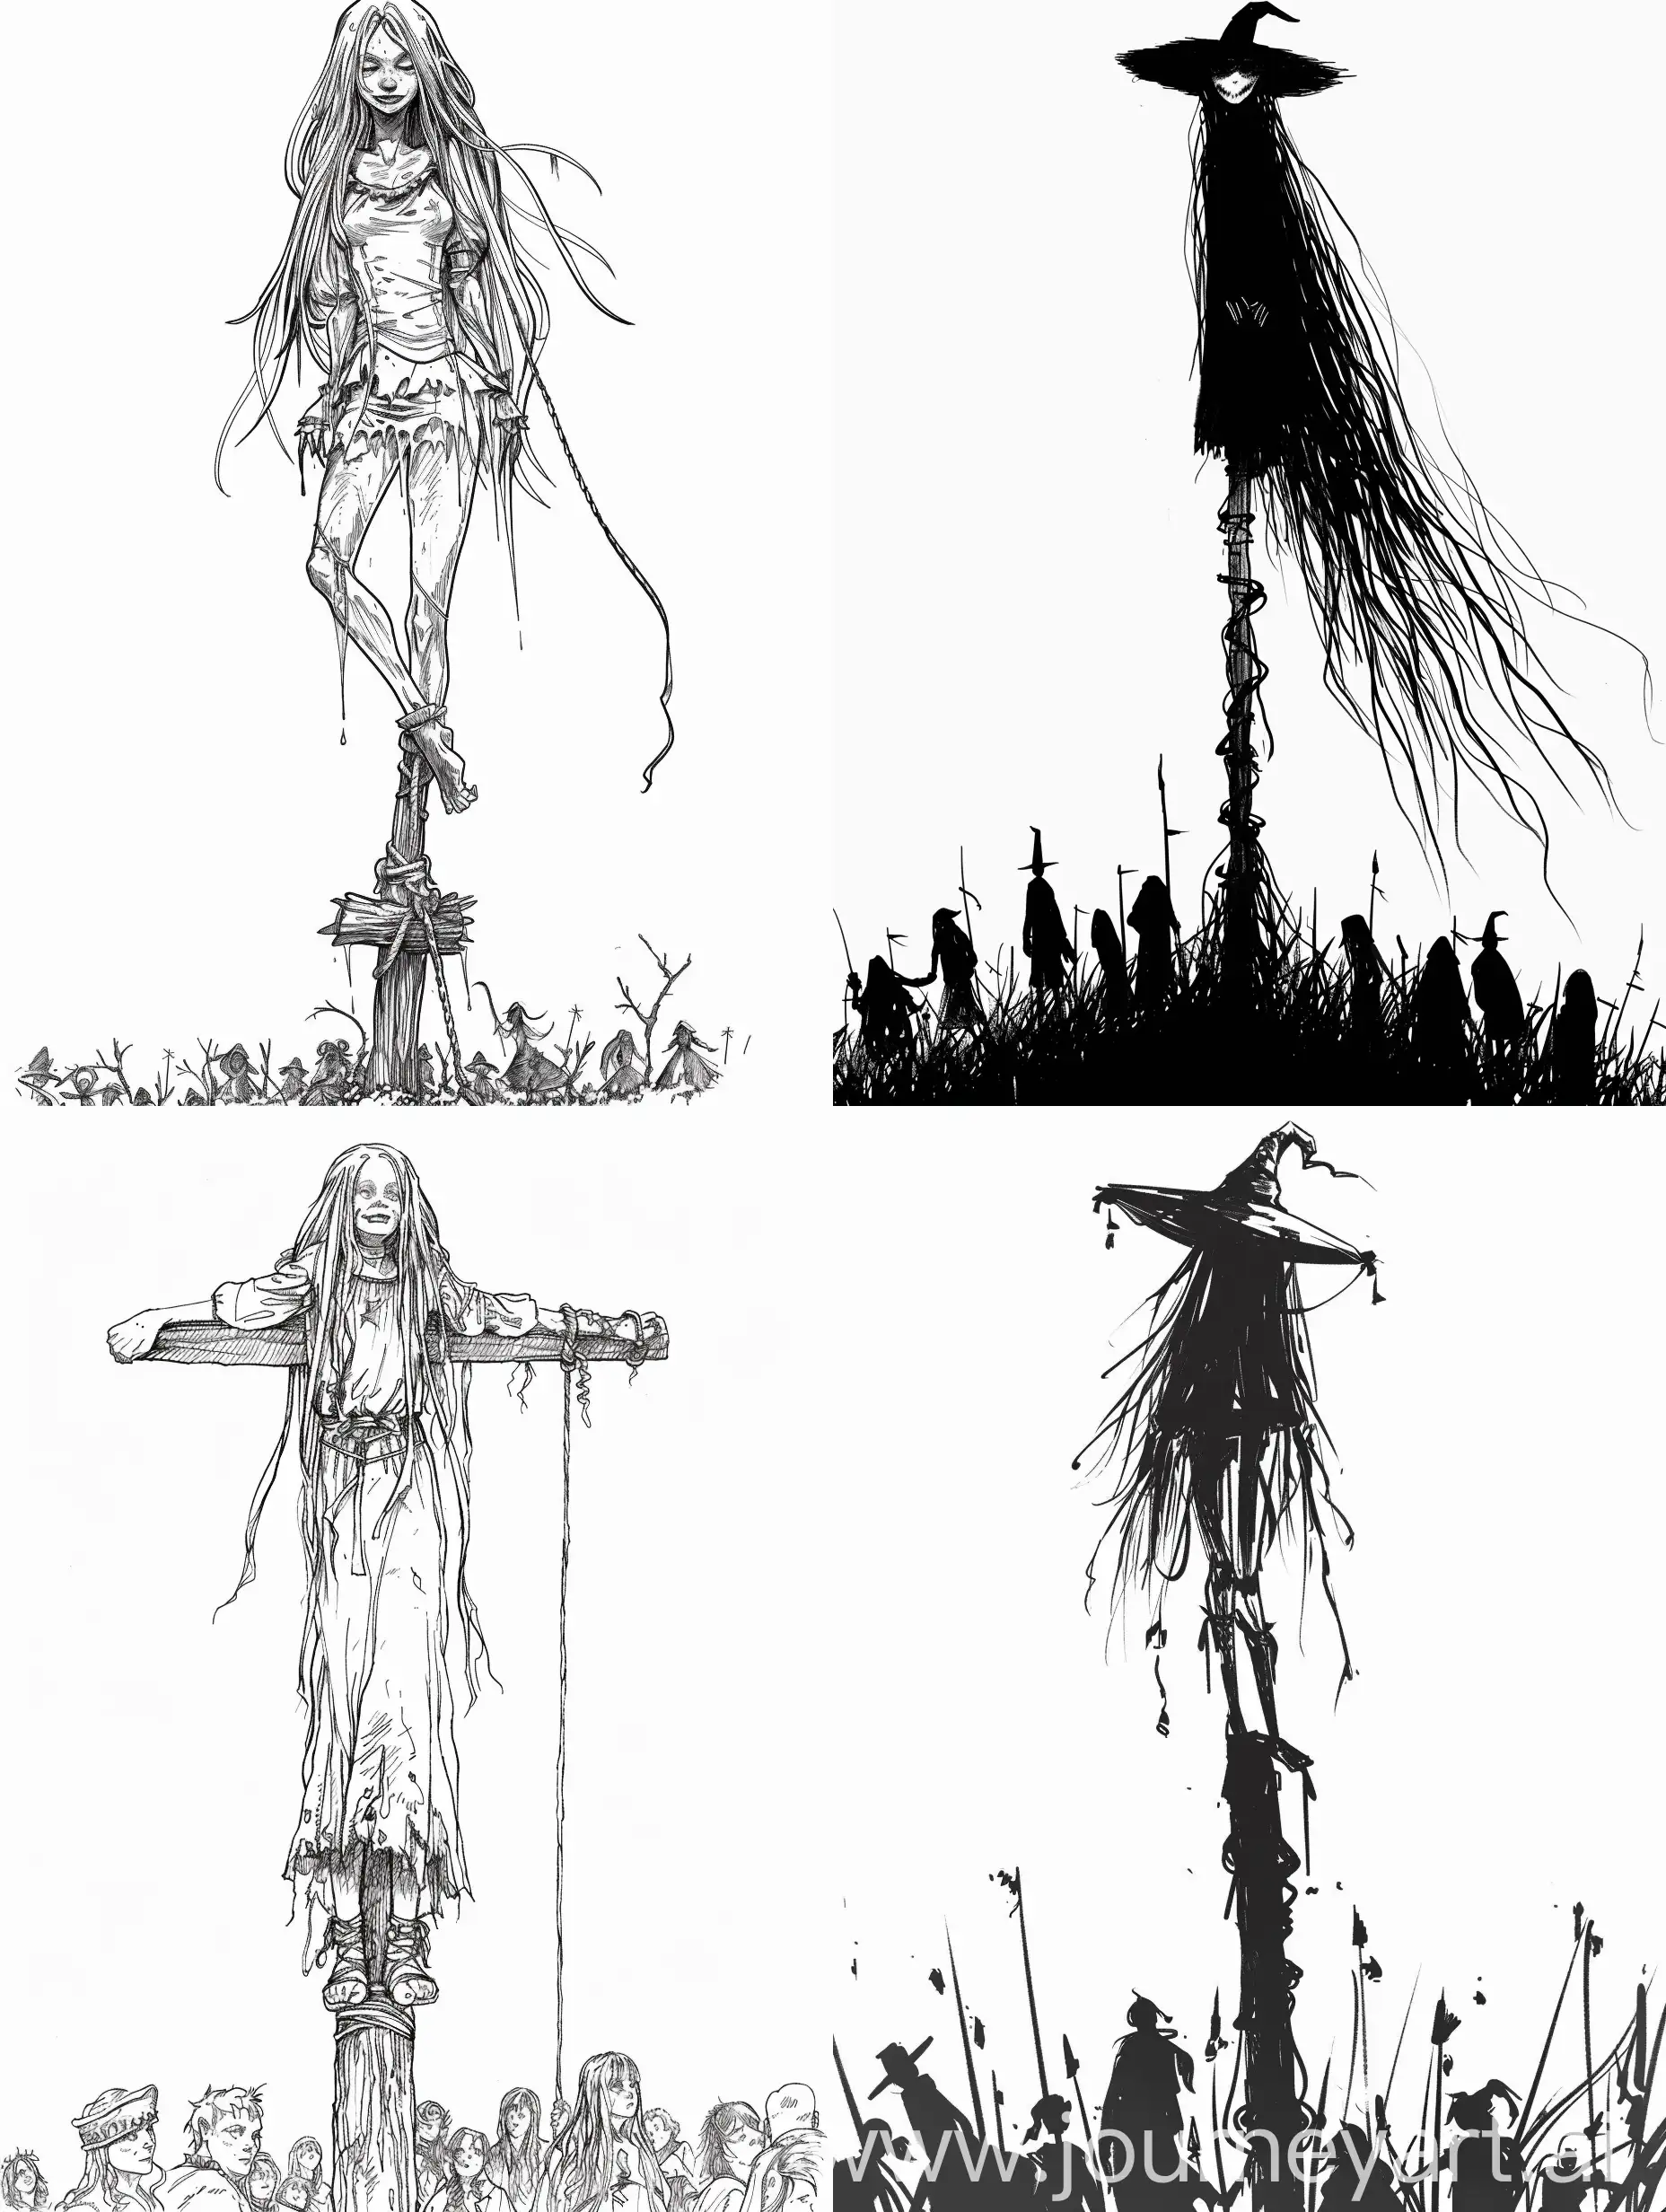 Smiling-Witch-Standing-on-Stake-with-Observing-Crowd-Black-Outline-Art